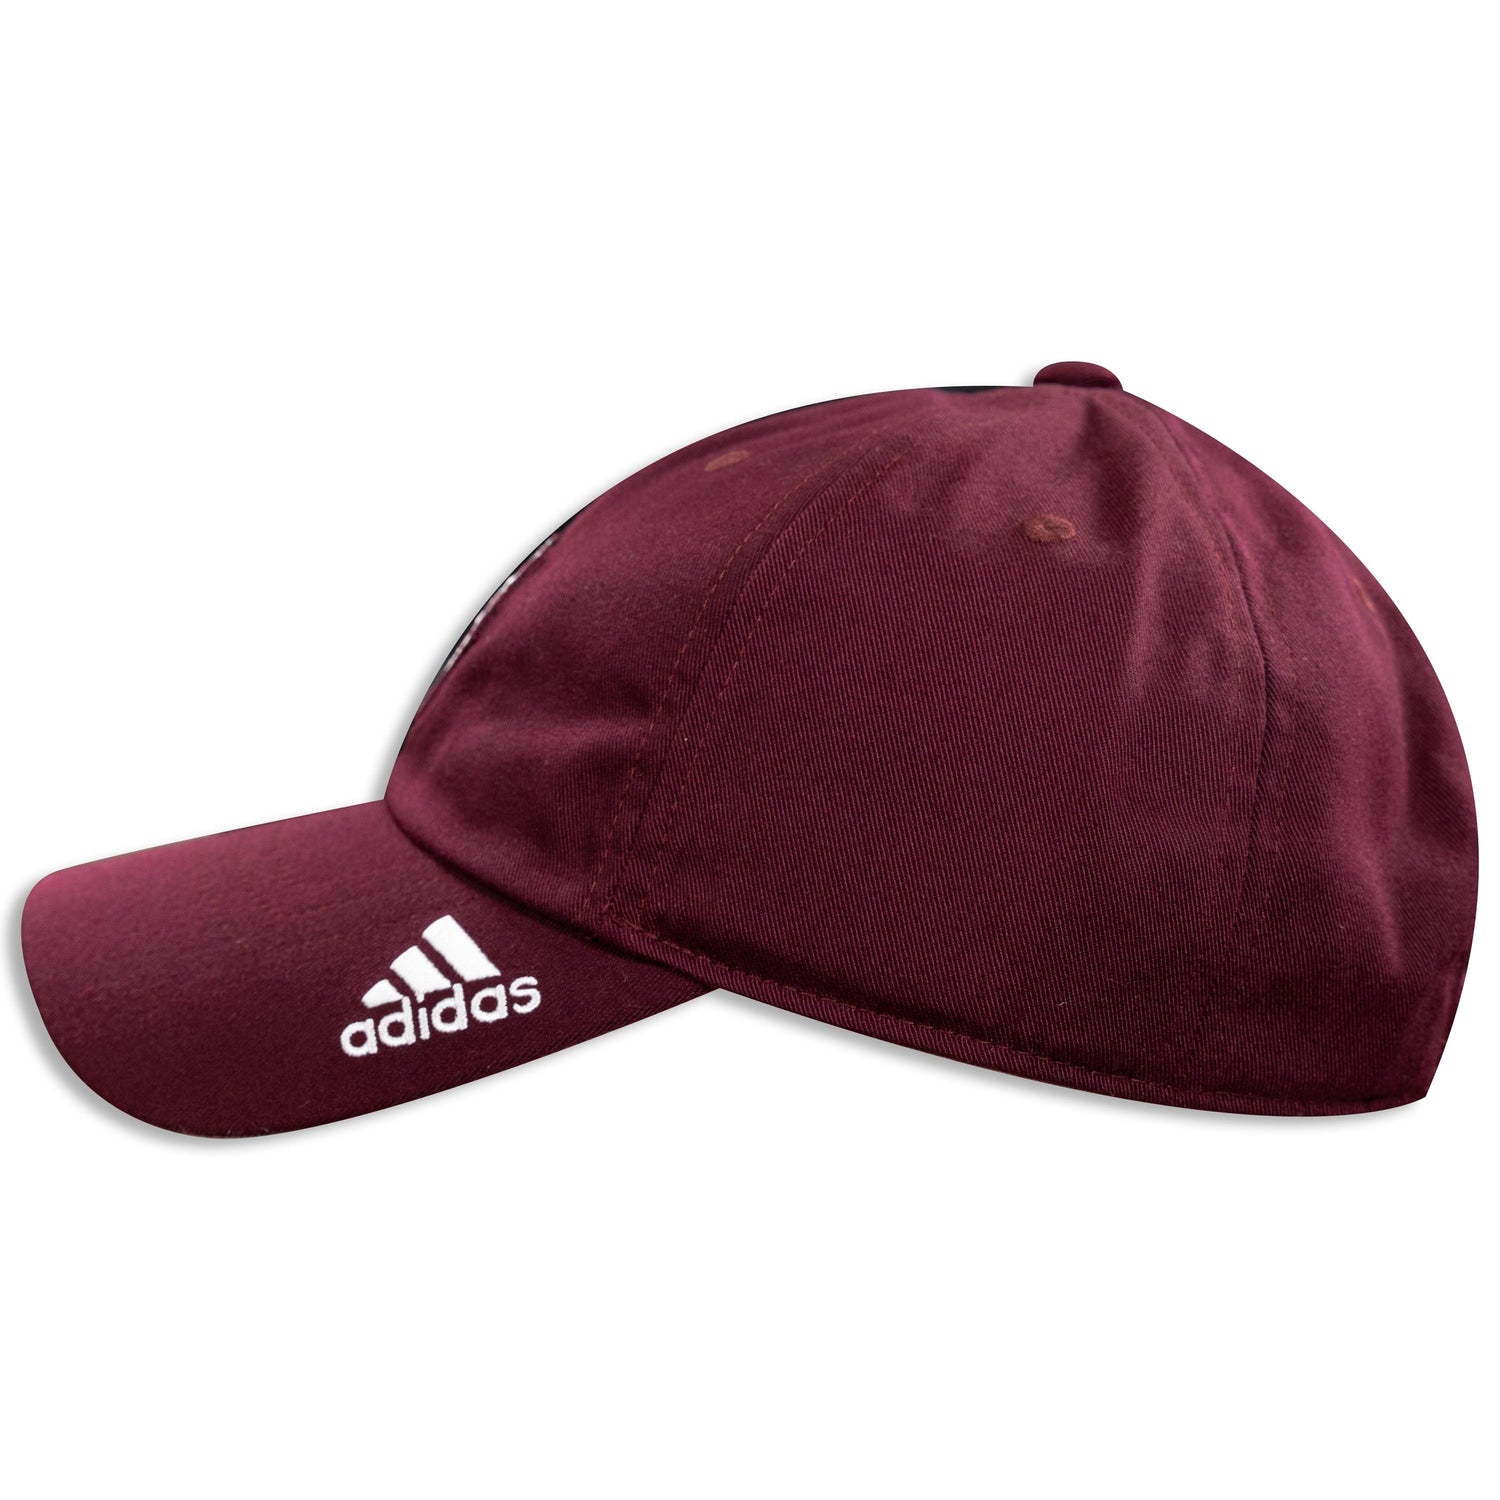 Texas A&M Lonestar Slouch Adjustable Hat